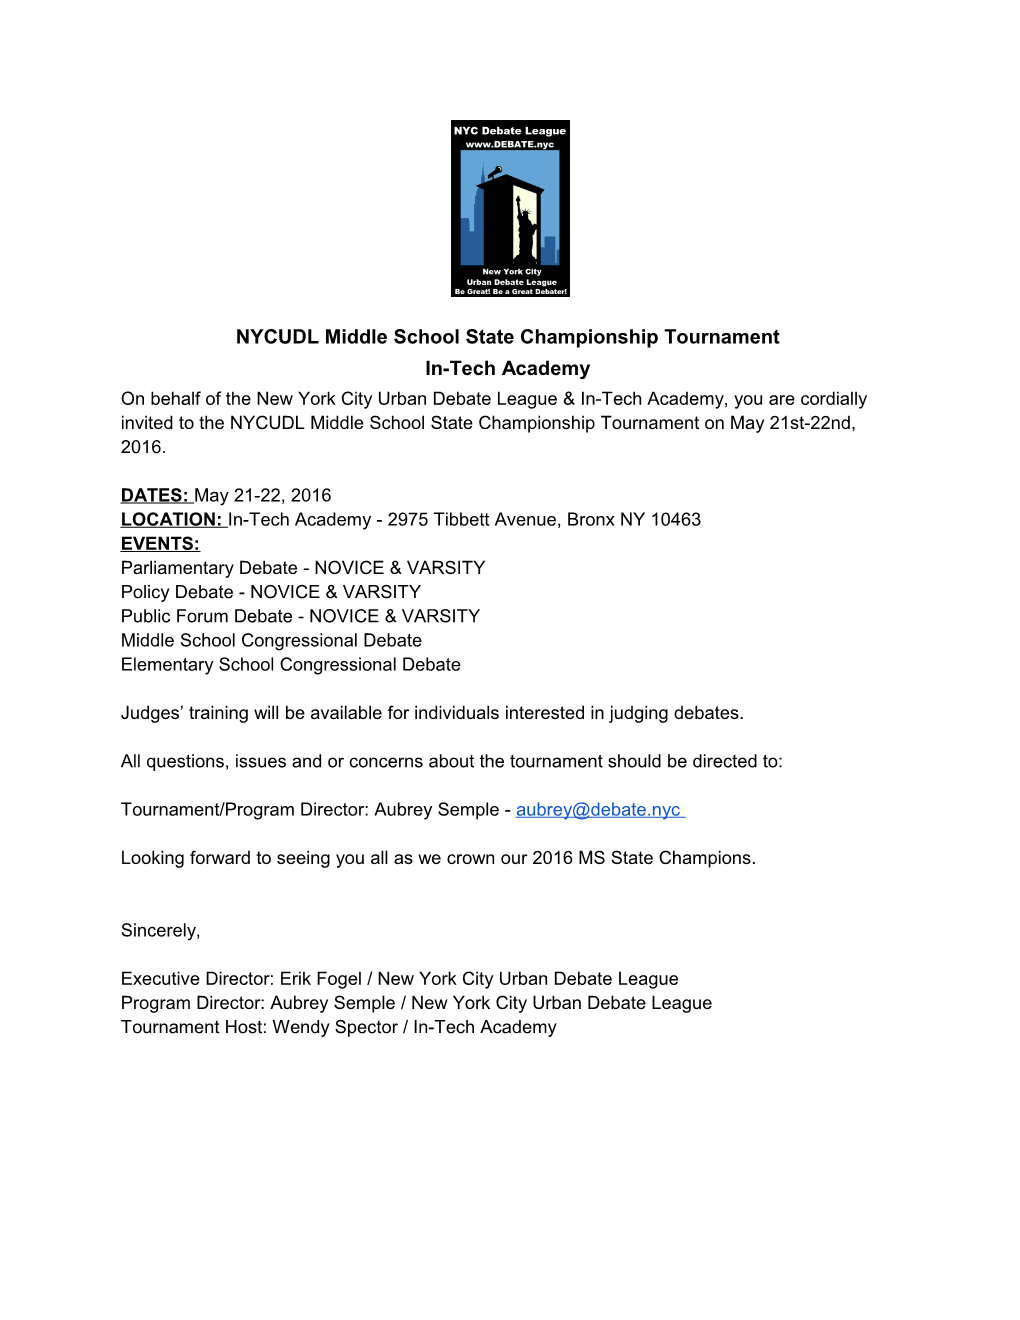 NYCUDL Middle School State Championship Tournament